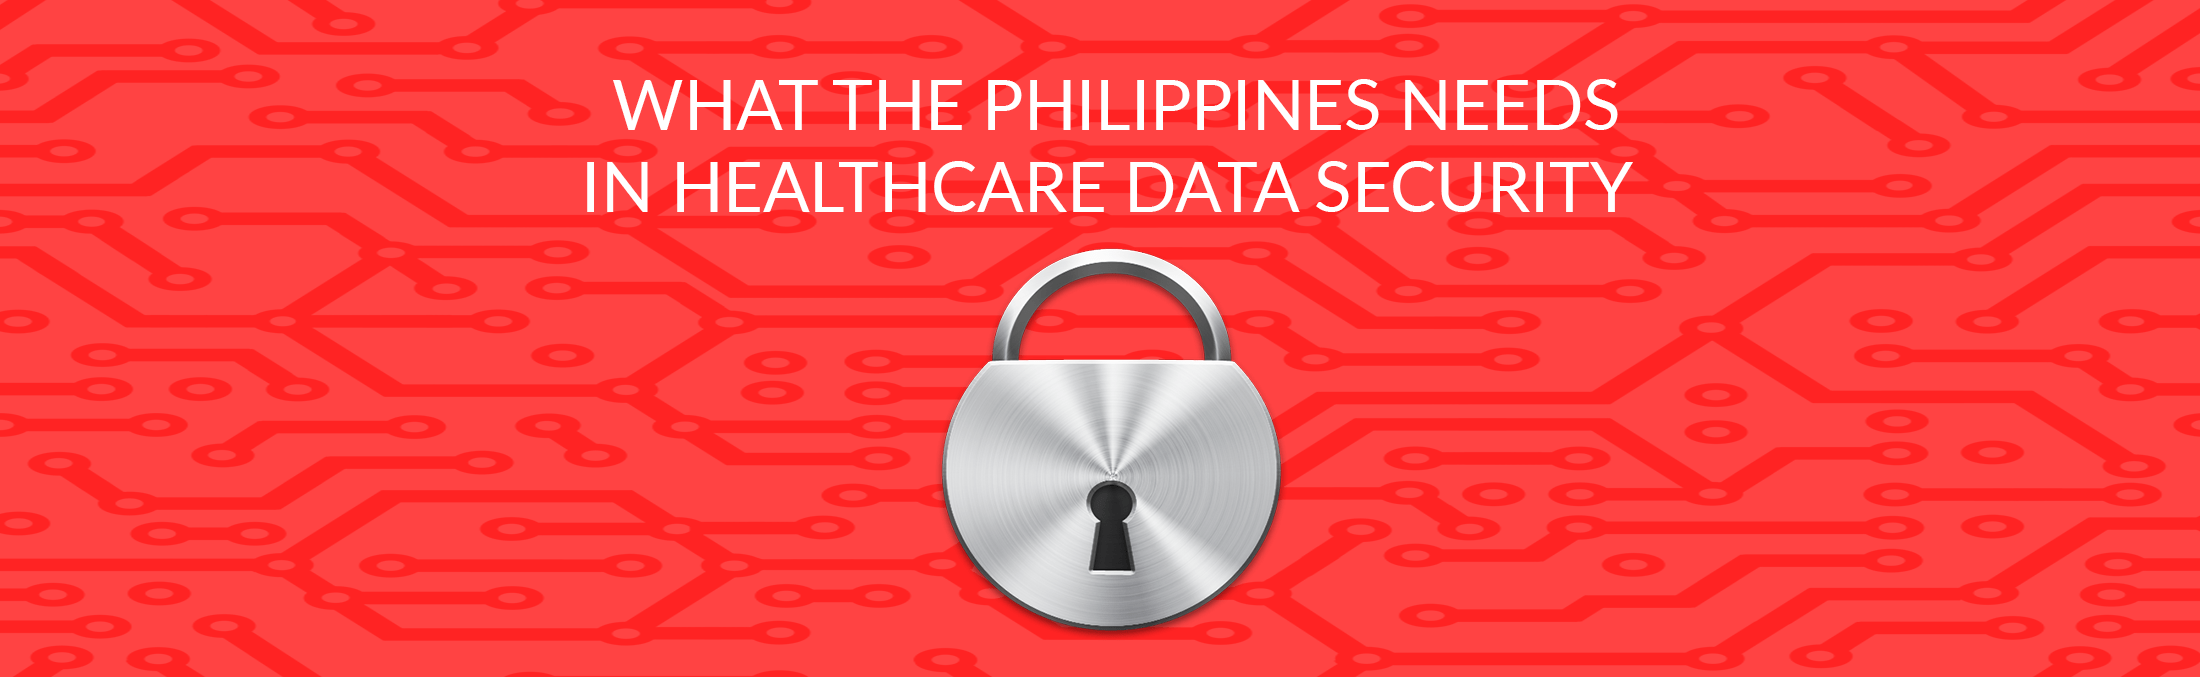 what the philippines needs in healthcare data security banner